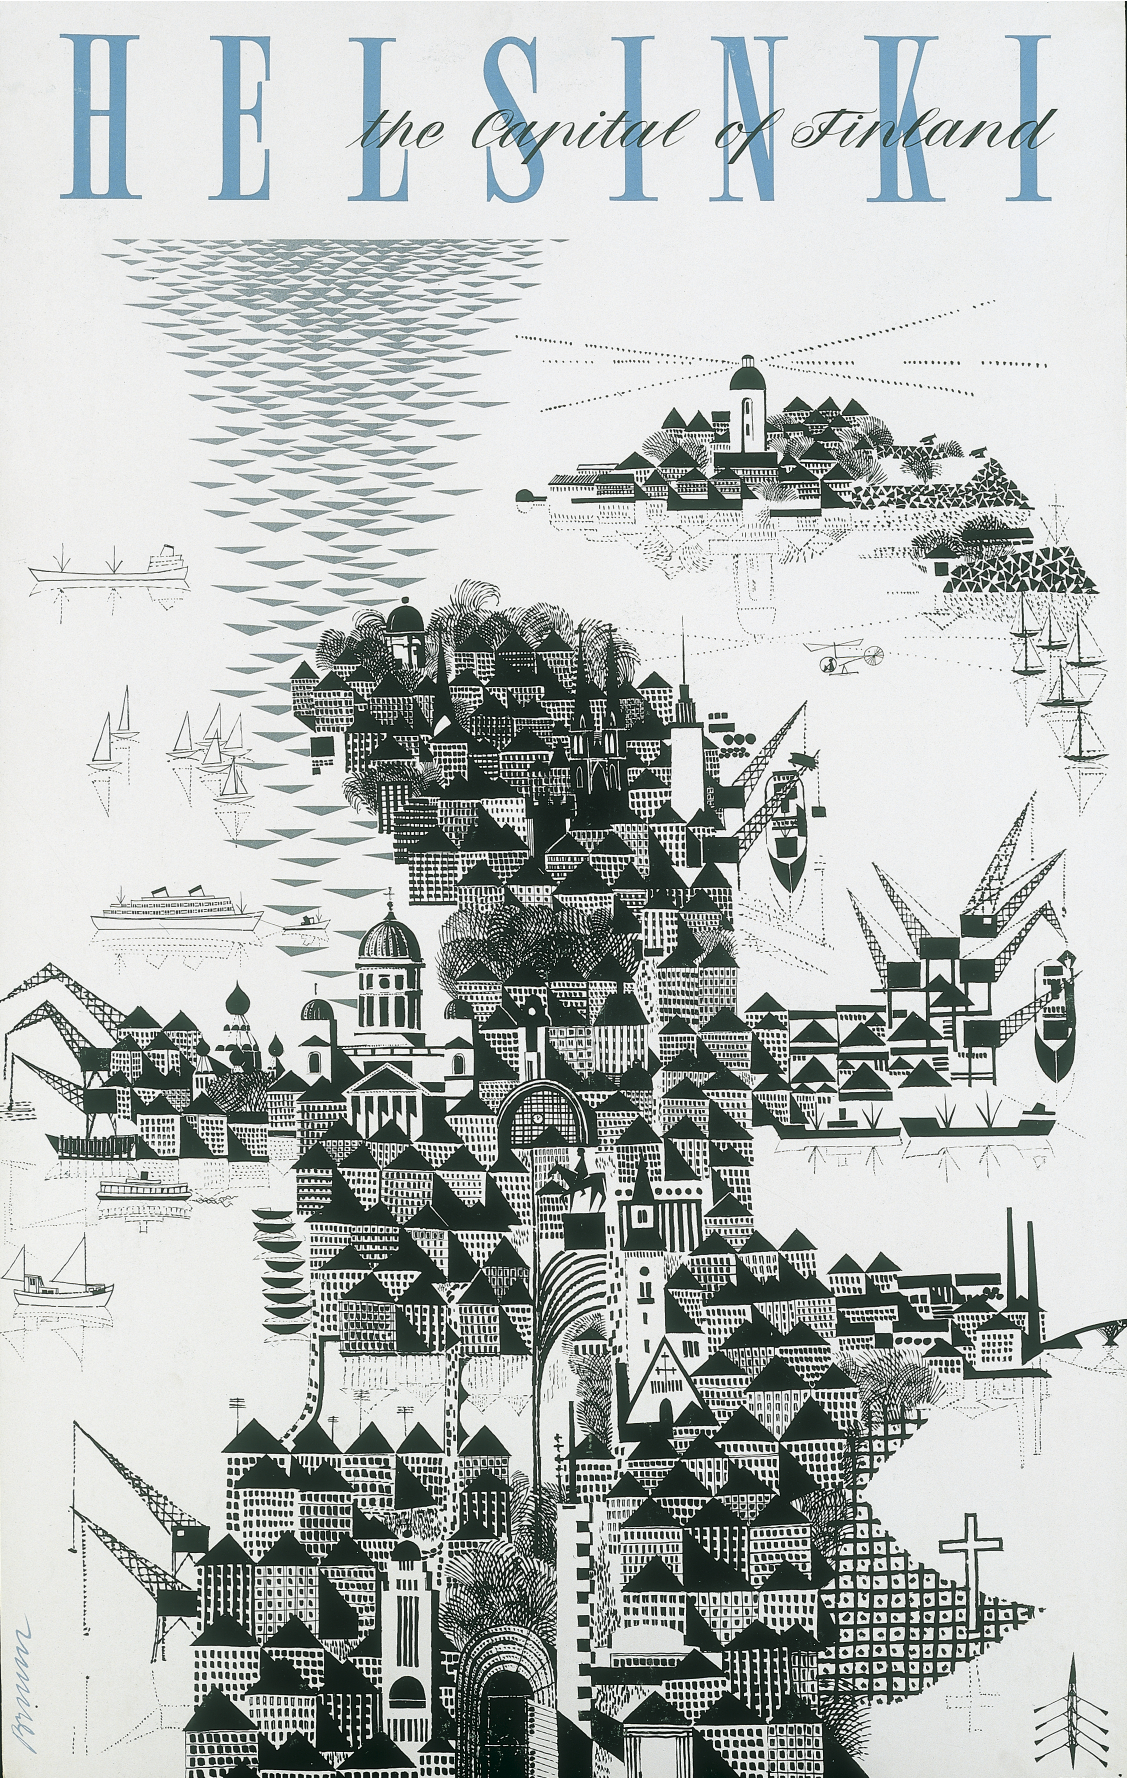 Figure 3.0: Helsinki by Erik Brunn, 1962, Reproduced with kind permission. Erik studied at the Institute of Industrial arts from 1944 through to 1949 and his art has become: ‘part of Finland’s cultural heritage’ (Londen, Enegren and Simons, 2008, p. 238). This picture shows Helsinki viewed from above from the north, looking to the south and the sea.